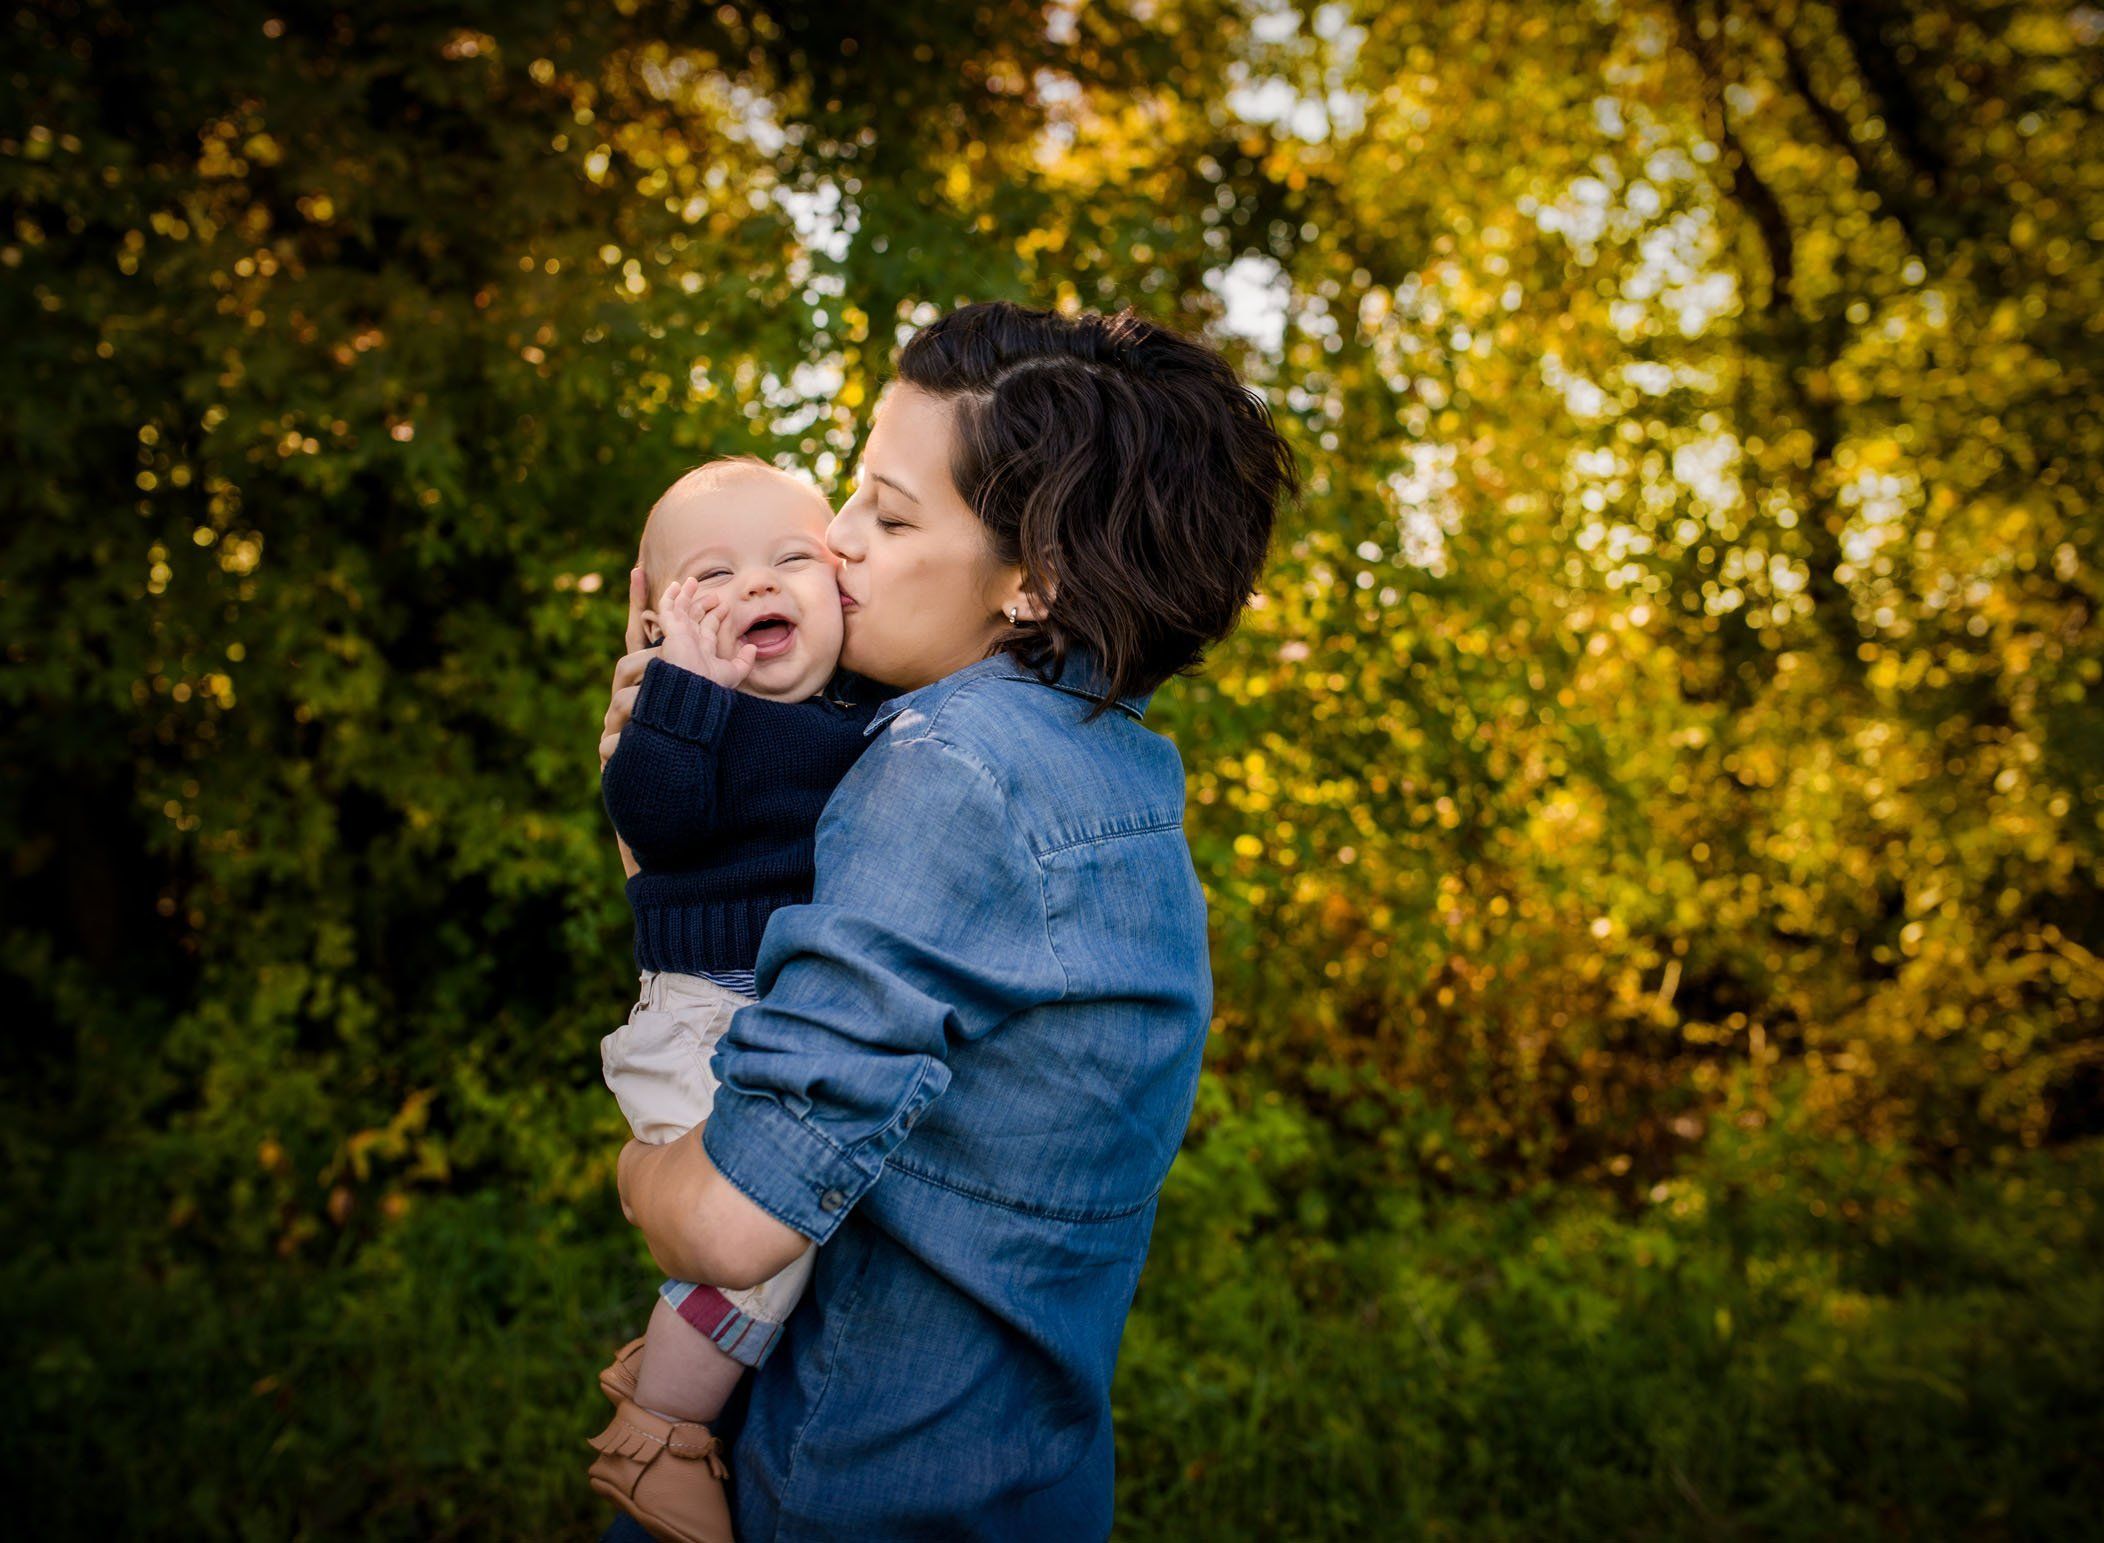 Mom kissing 6 month old baby boy outside in fall foliage